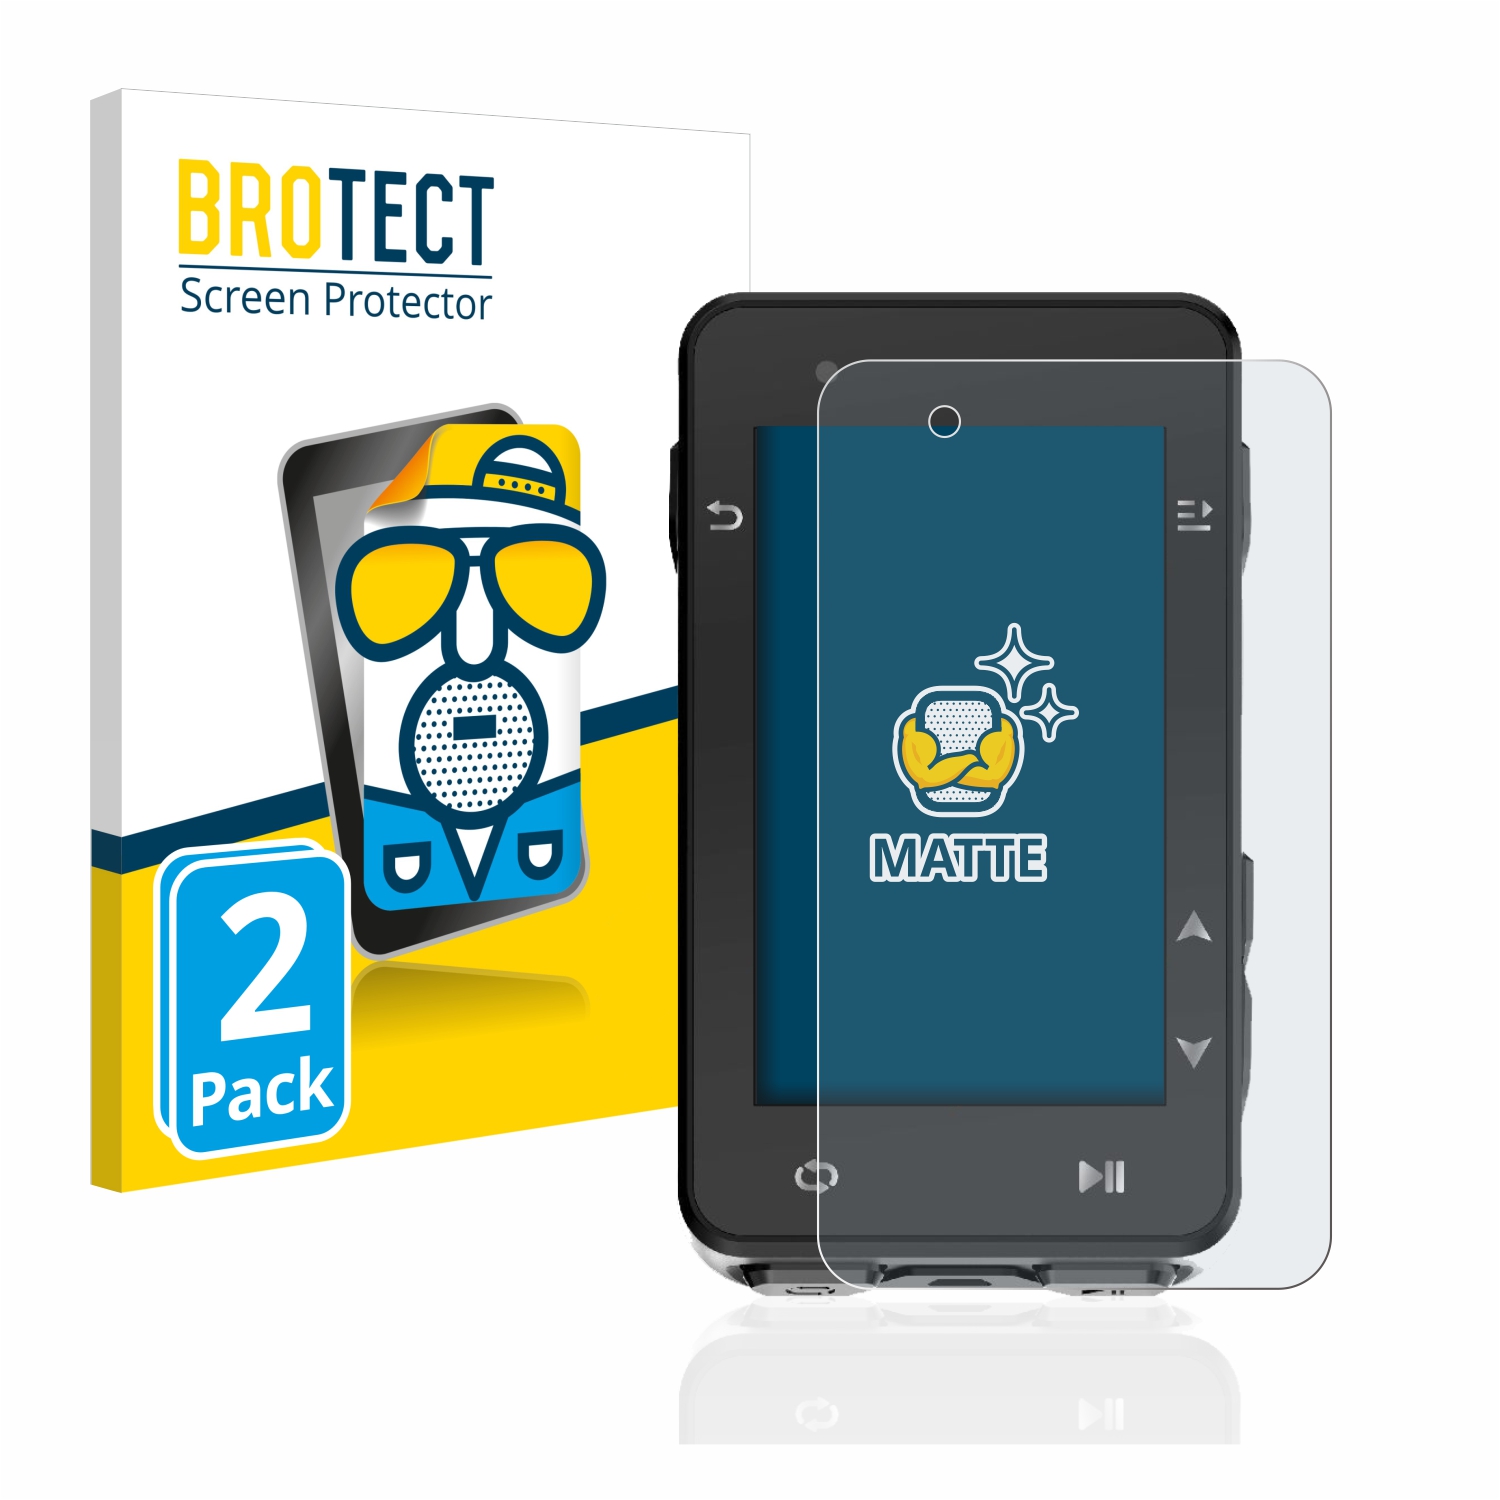 2x BROTECT Matte Screen Protector for igpsport iGS630